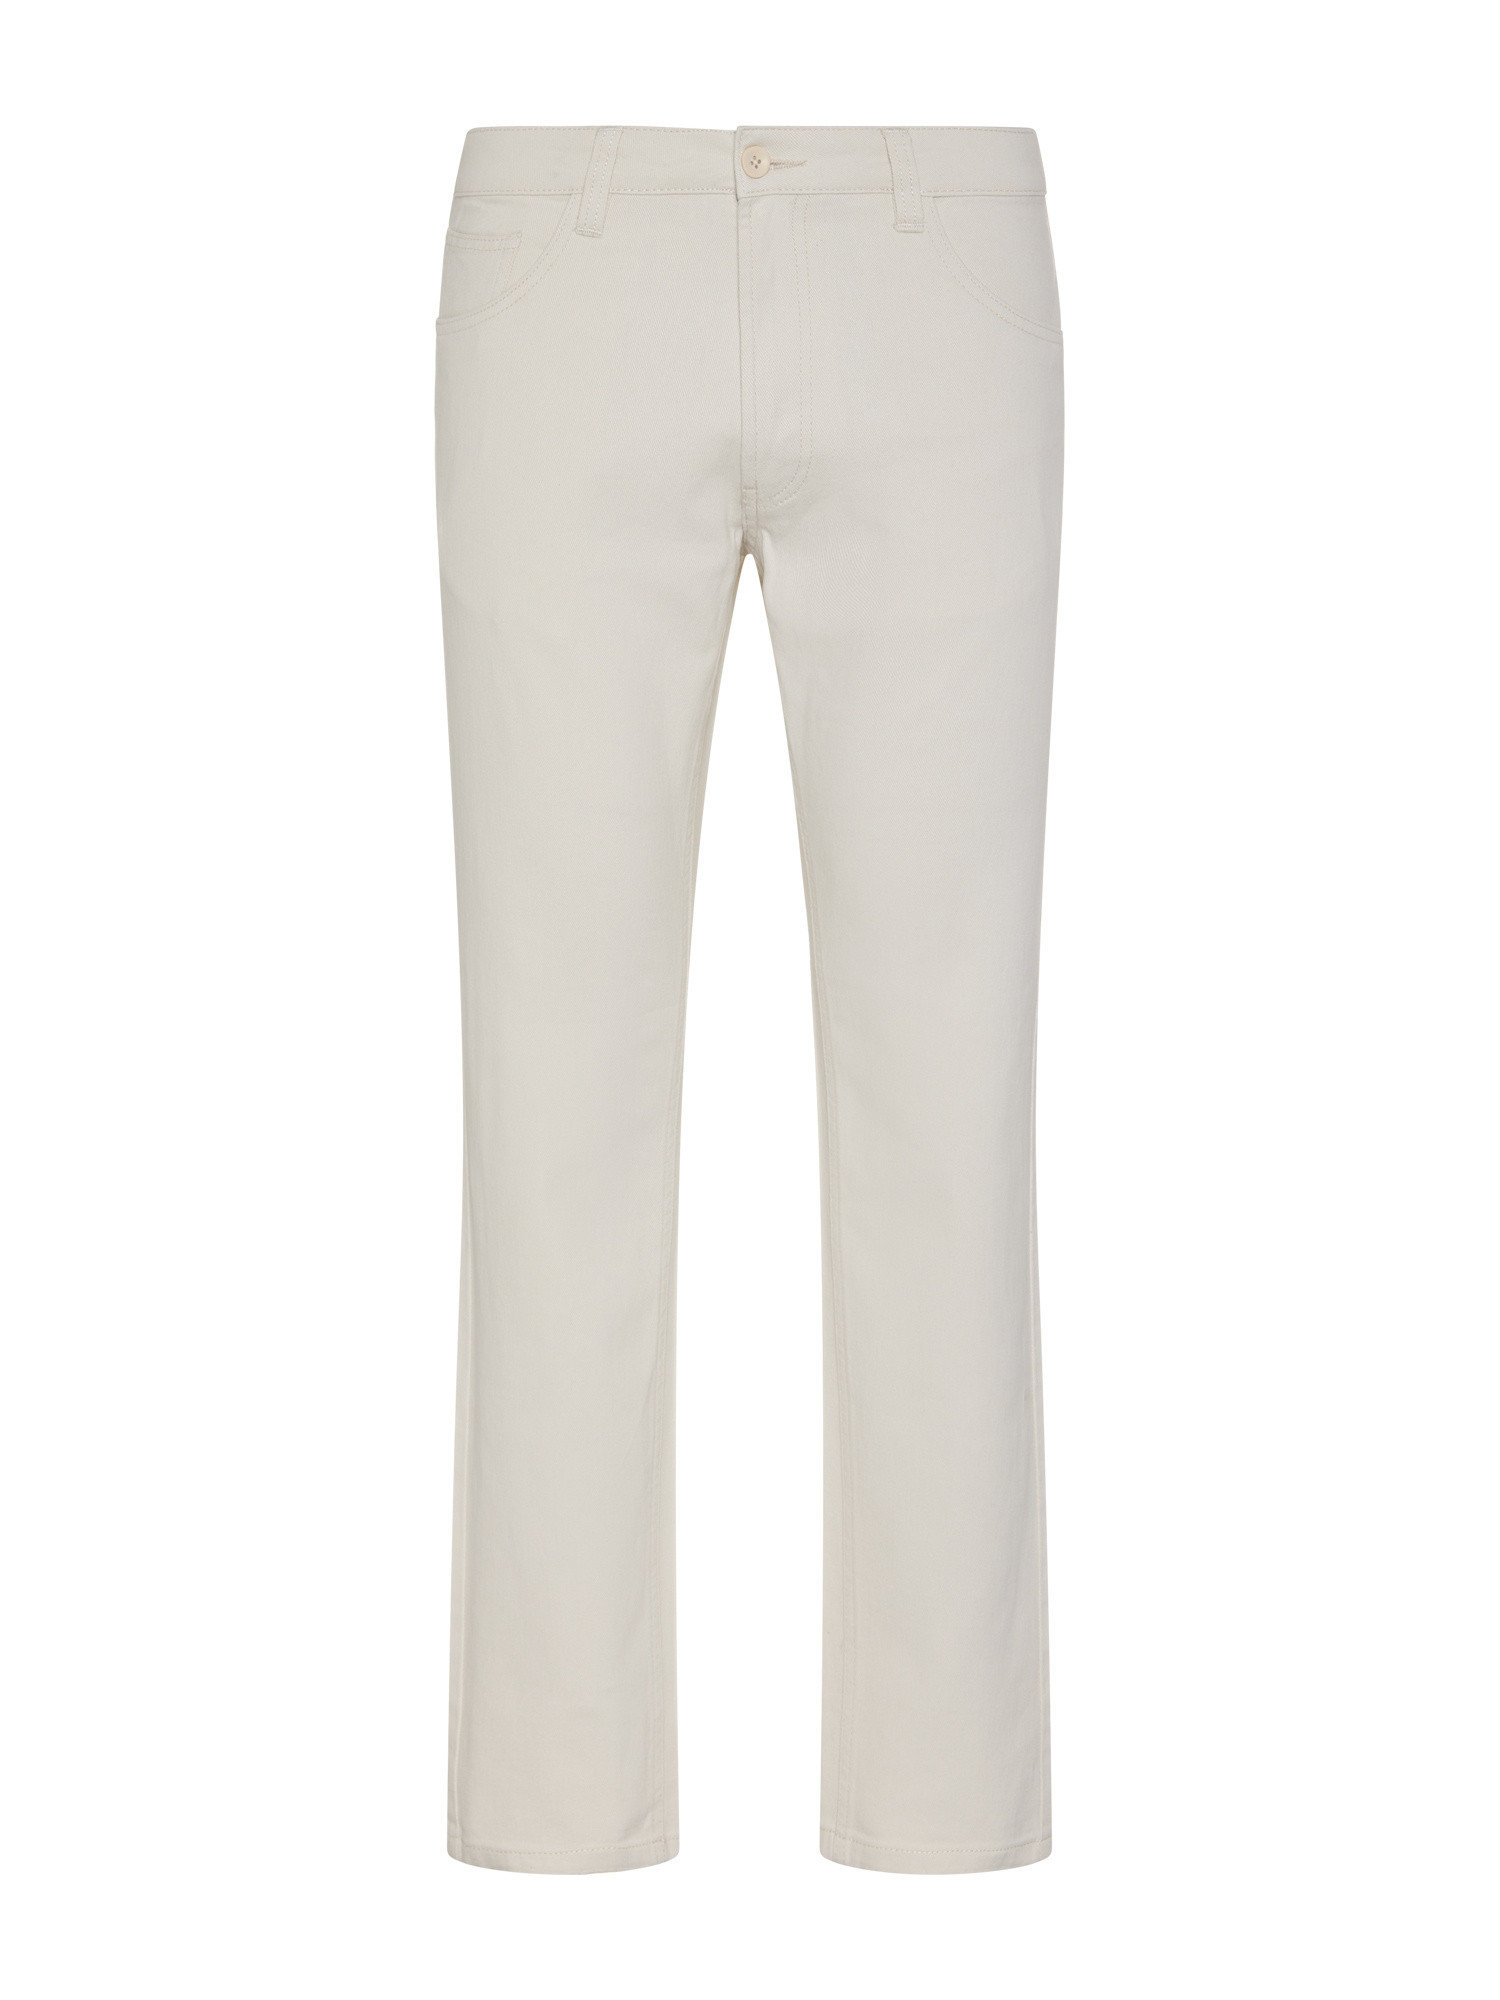 JCT - Regular fit five pocket trousers in pure cotton, White Cream, large image number 0